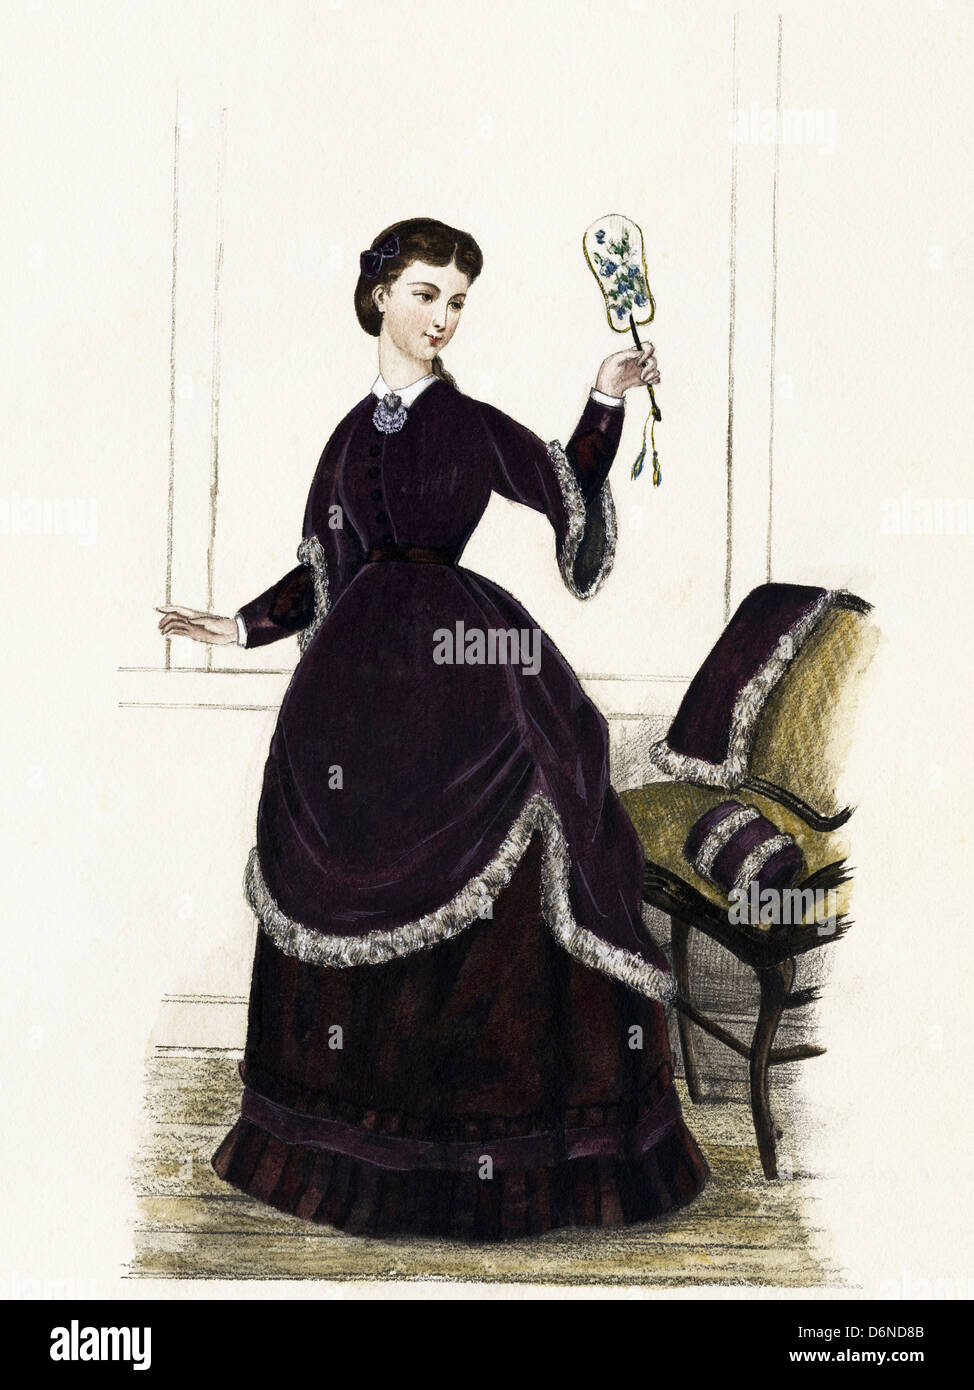 French fashion from the Victorian era dated 1870. Original watercolour painting artist unknown Stock Photo